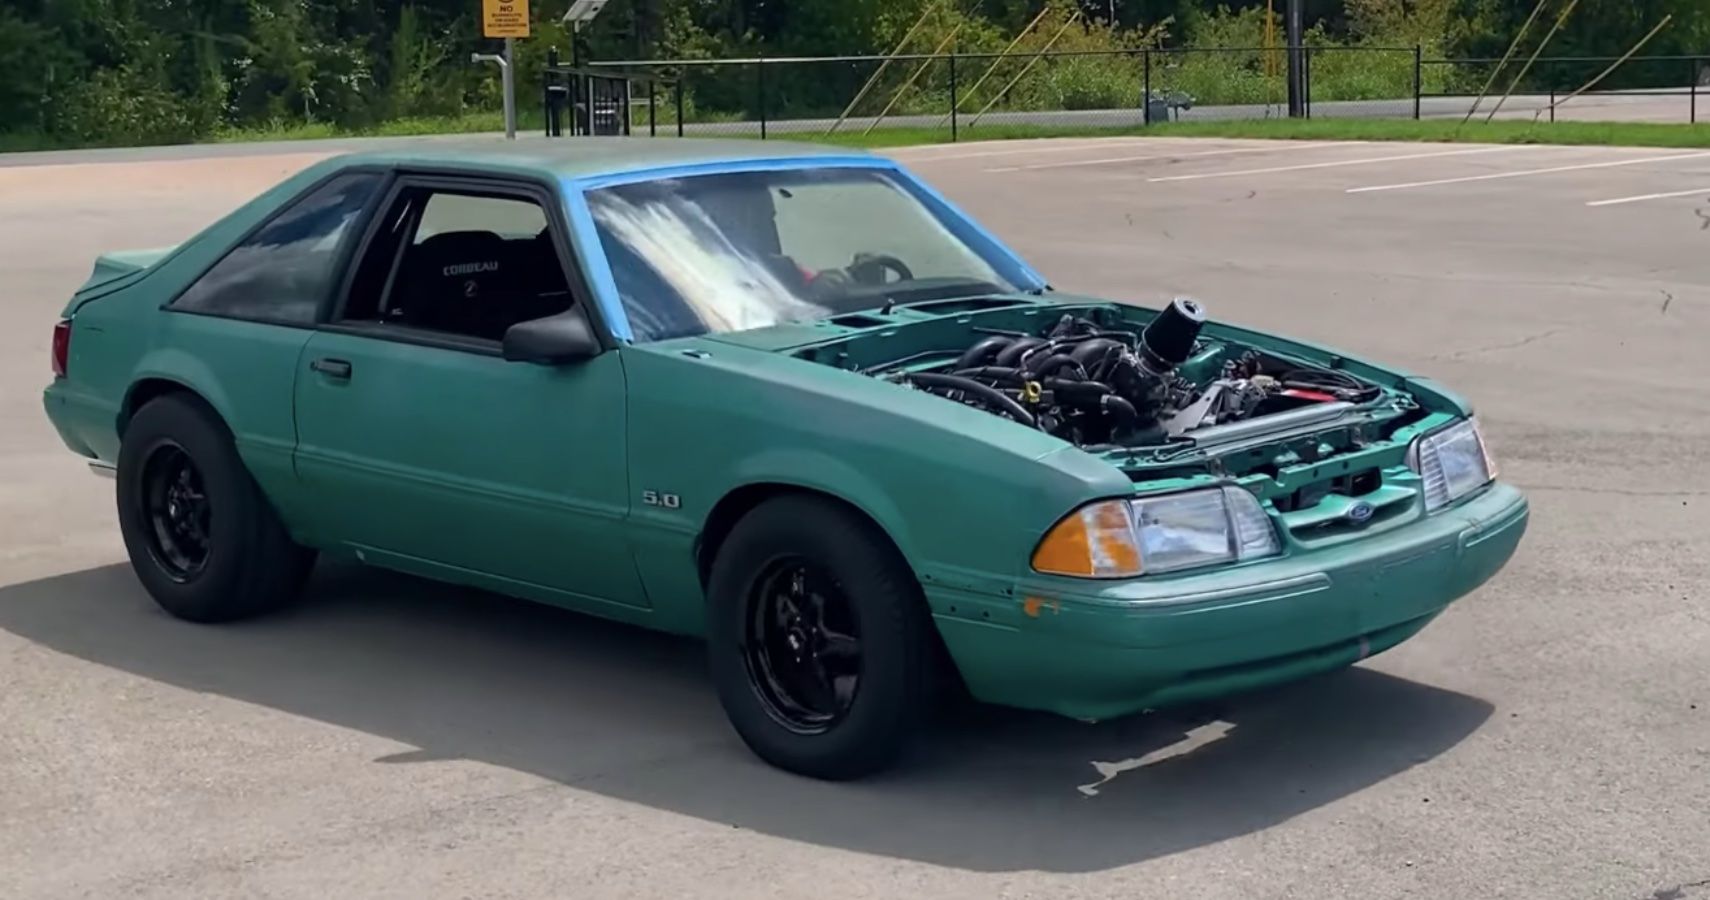 Godzilla crate engine-swapped Fox Body Ford Mustang, green